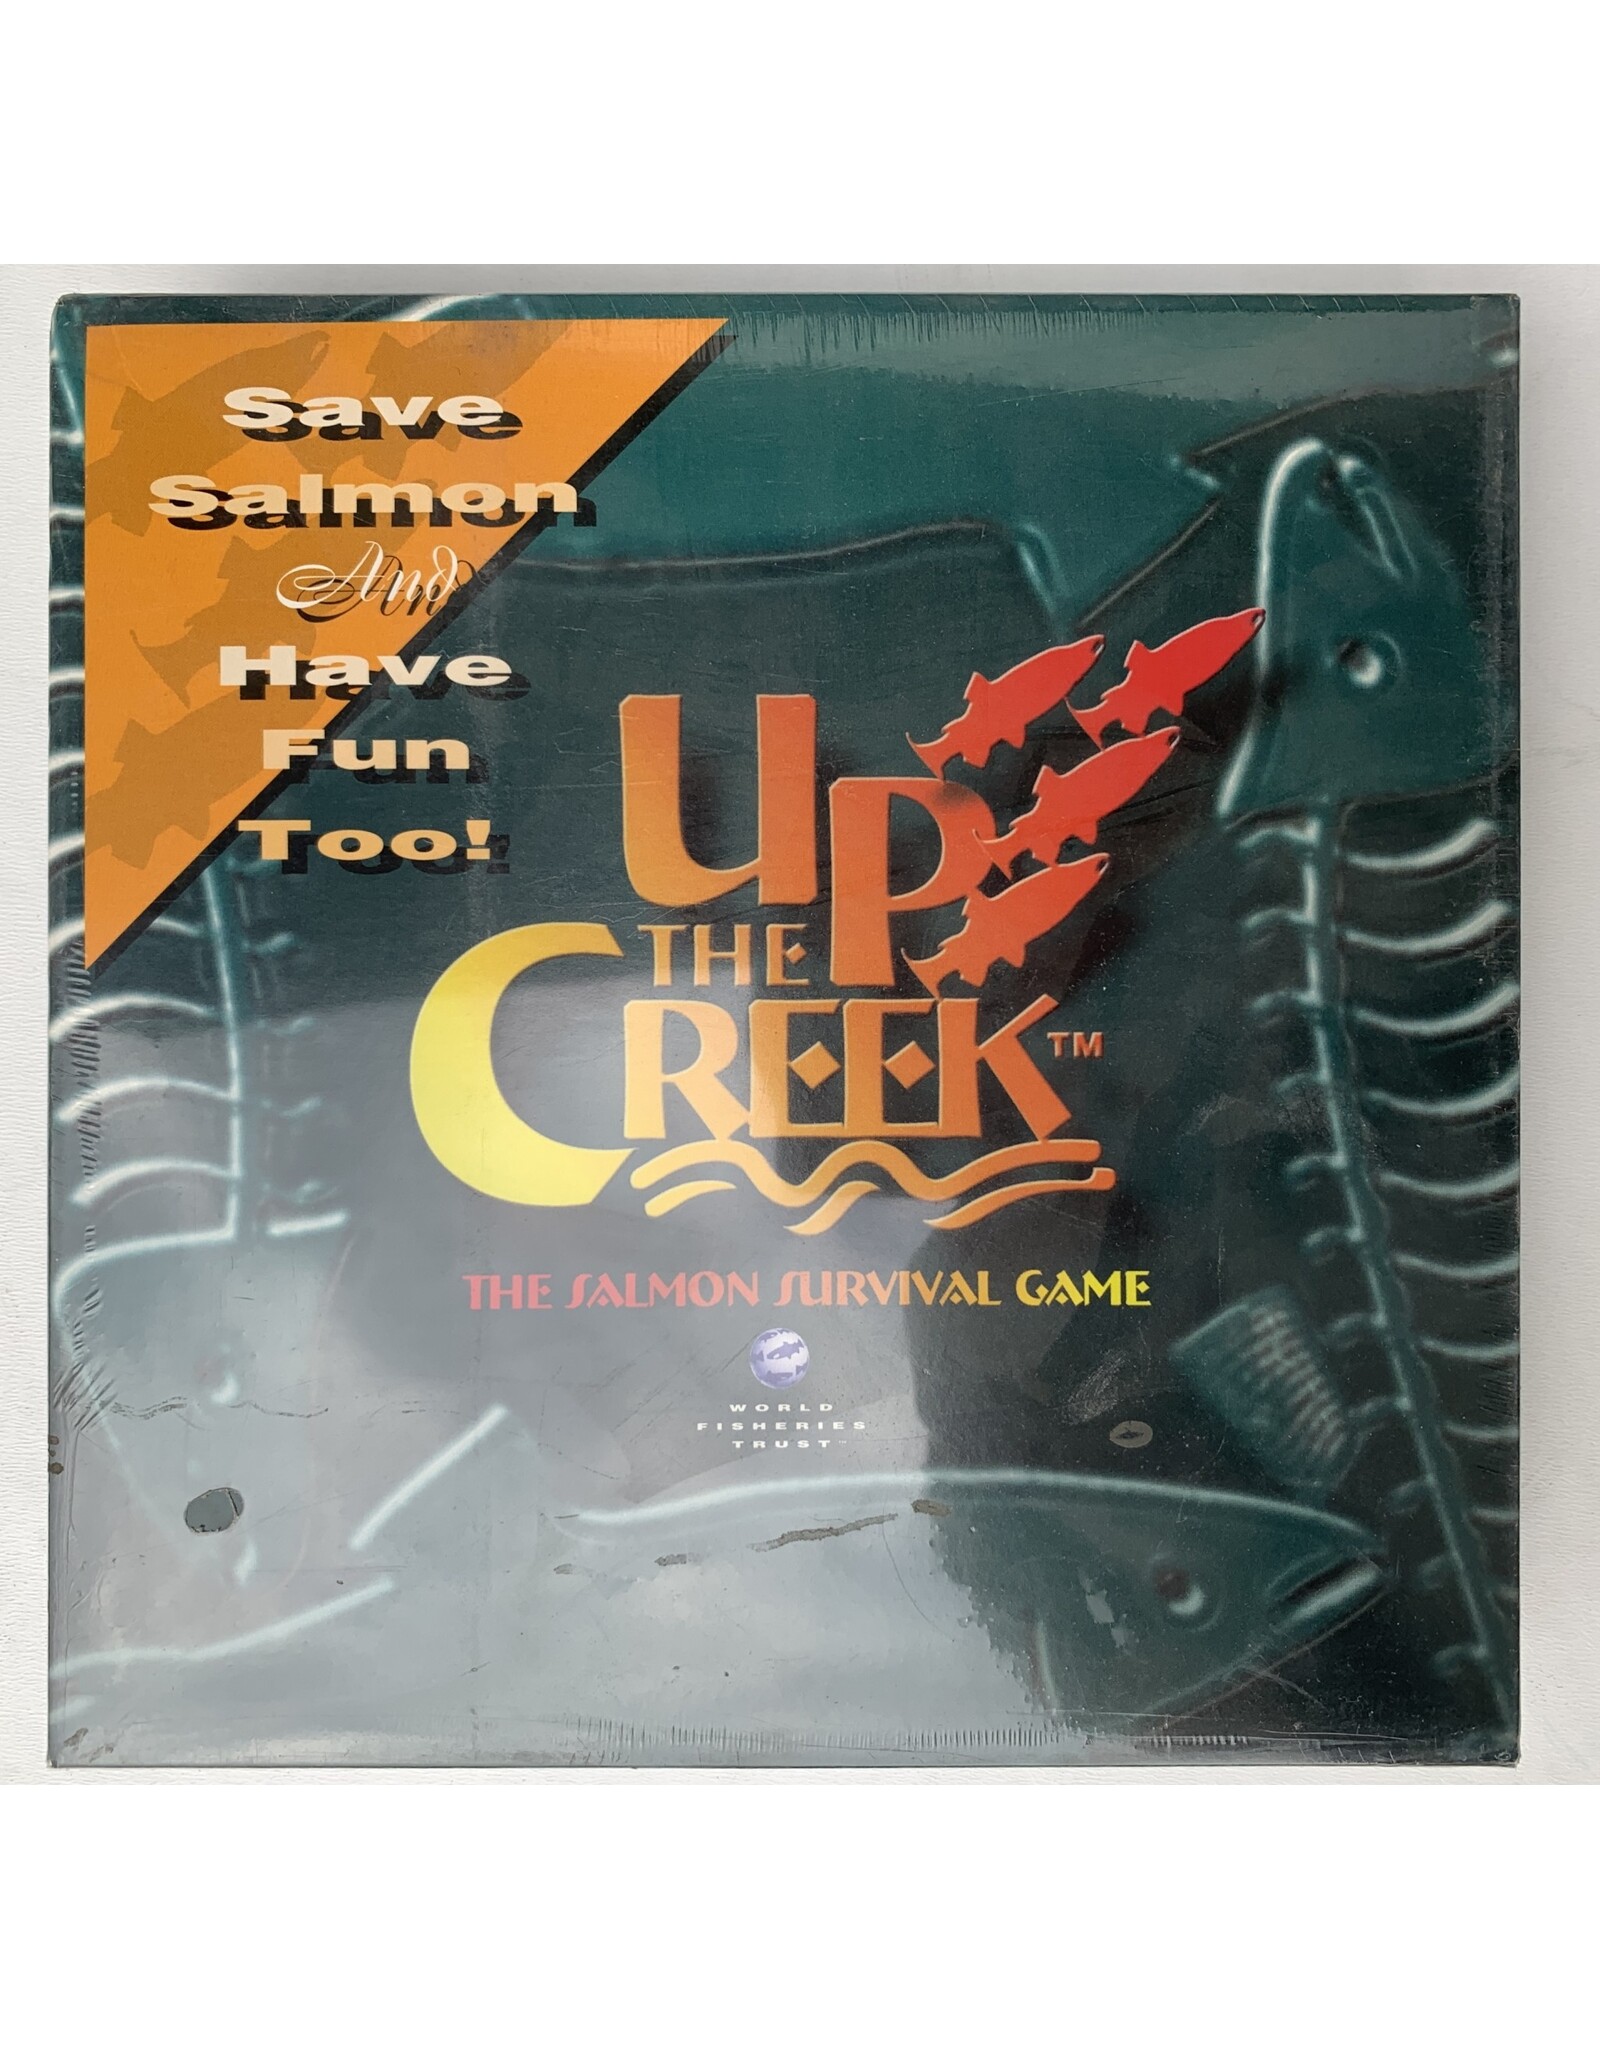 World Fisheries Trust Up the Creek; The Salmon Survival Game (1998) NIS